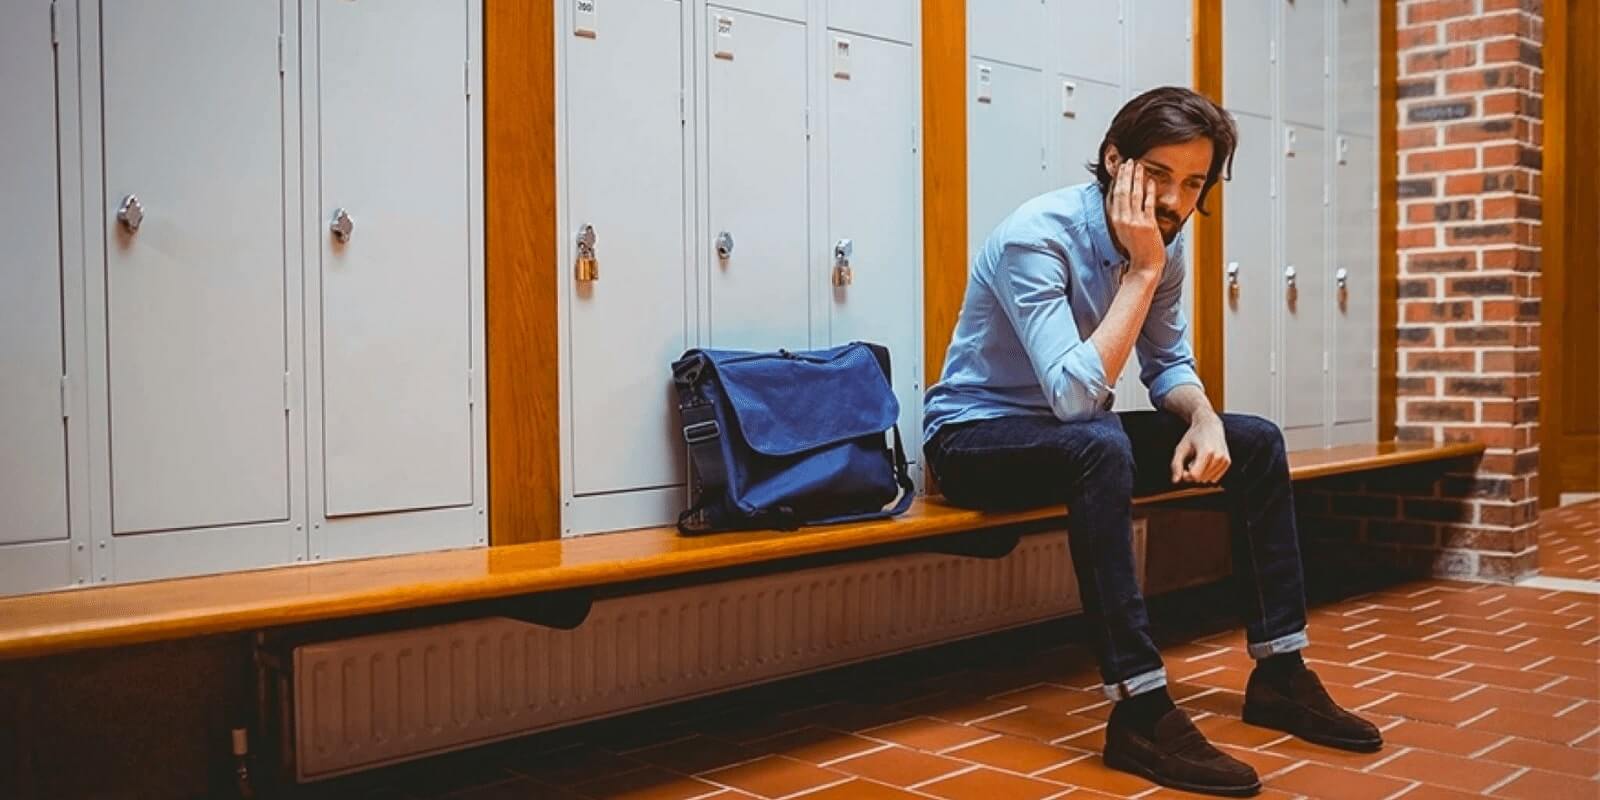 A college guy looking stressed in front of school lockers